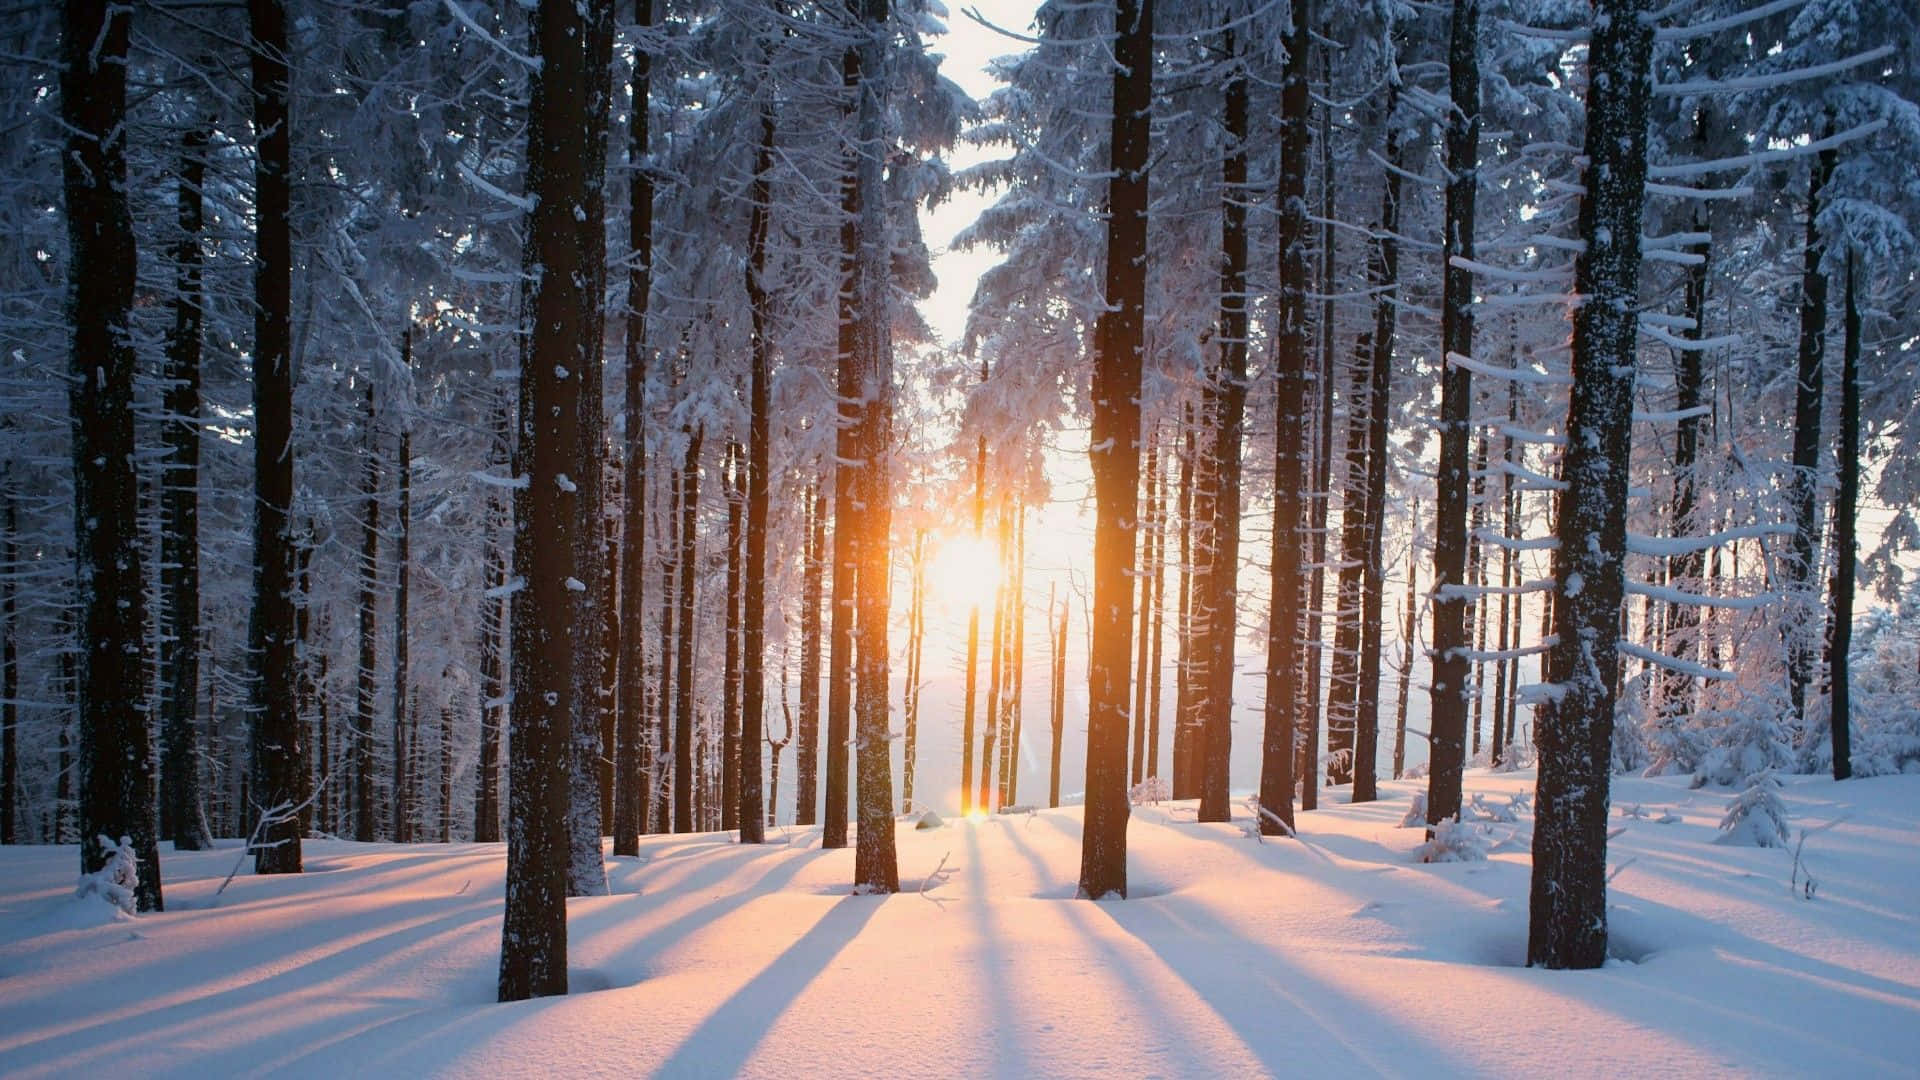 Enjoy the beauty of a peaceful winter forest